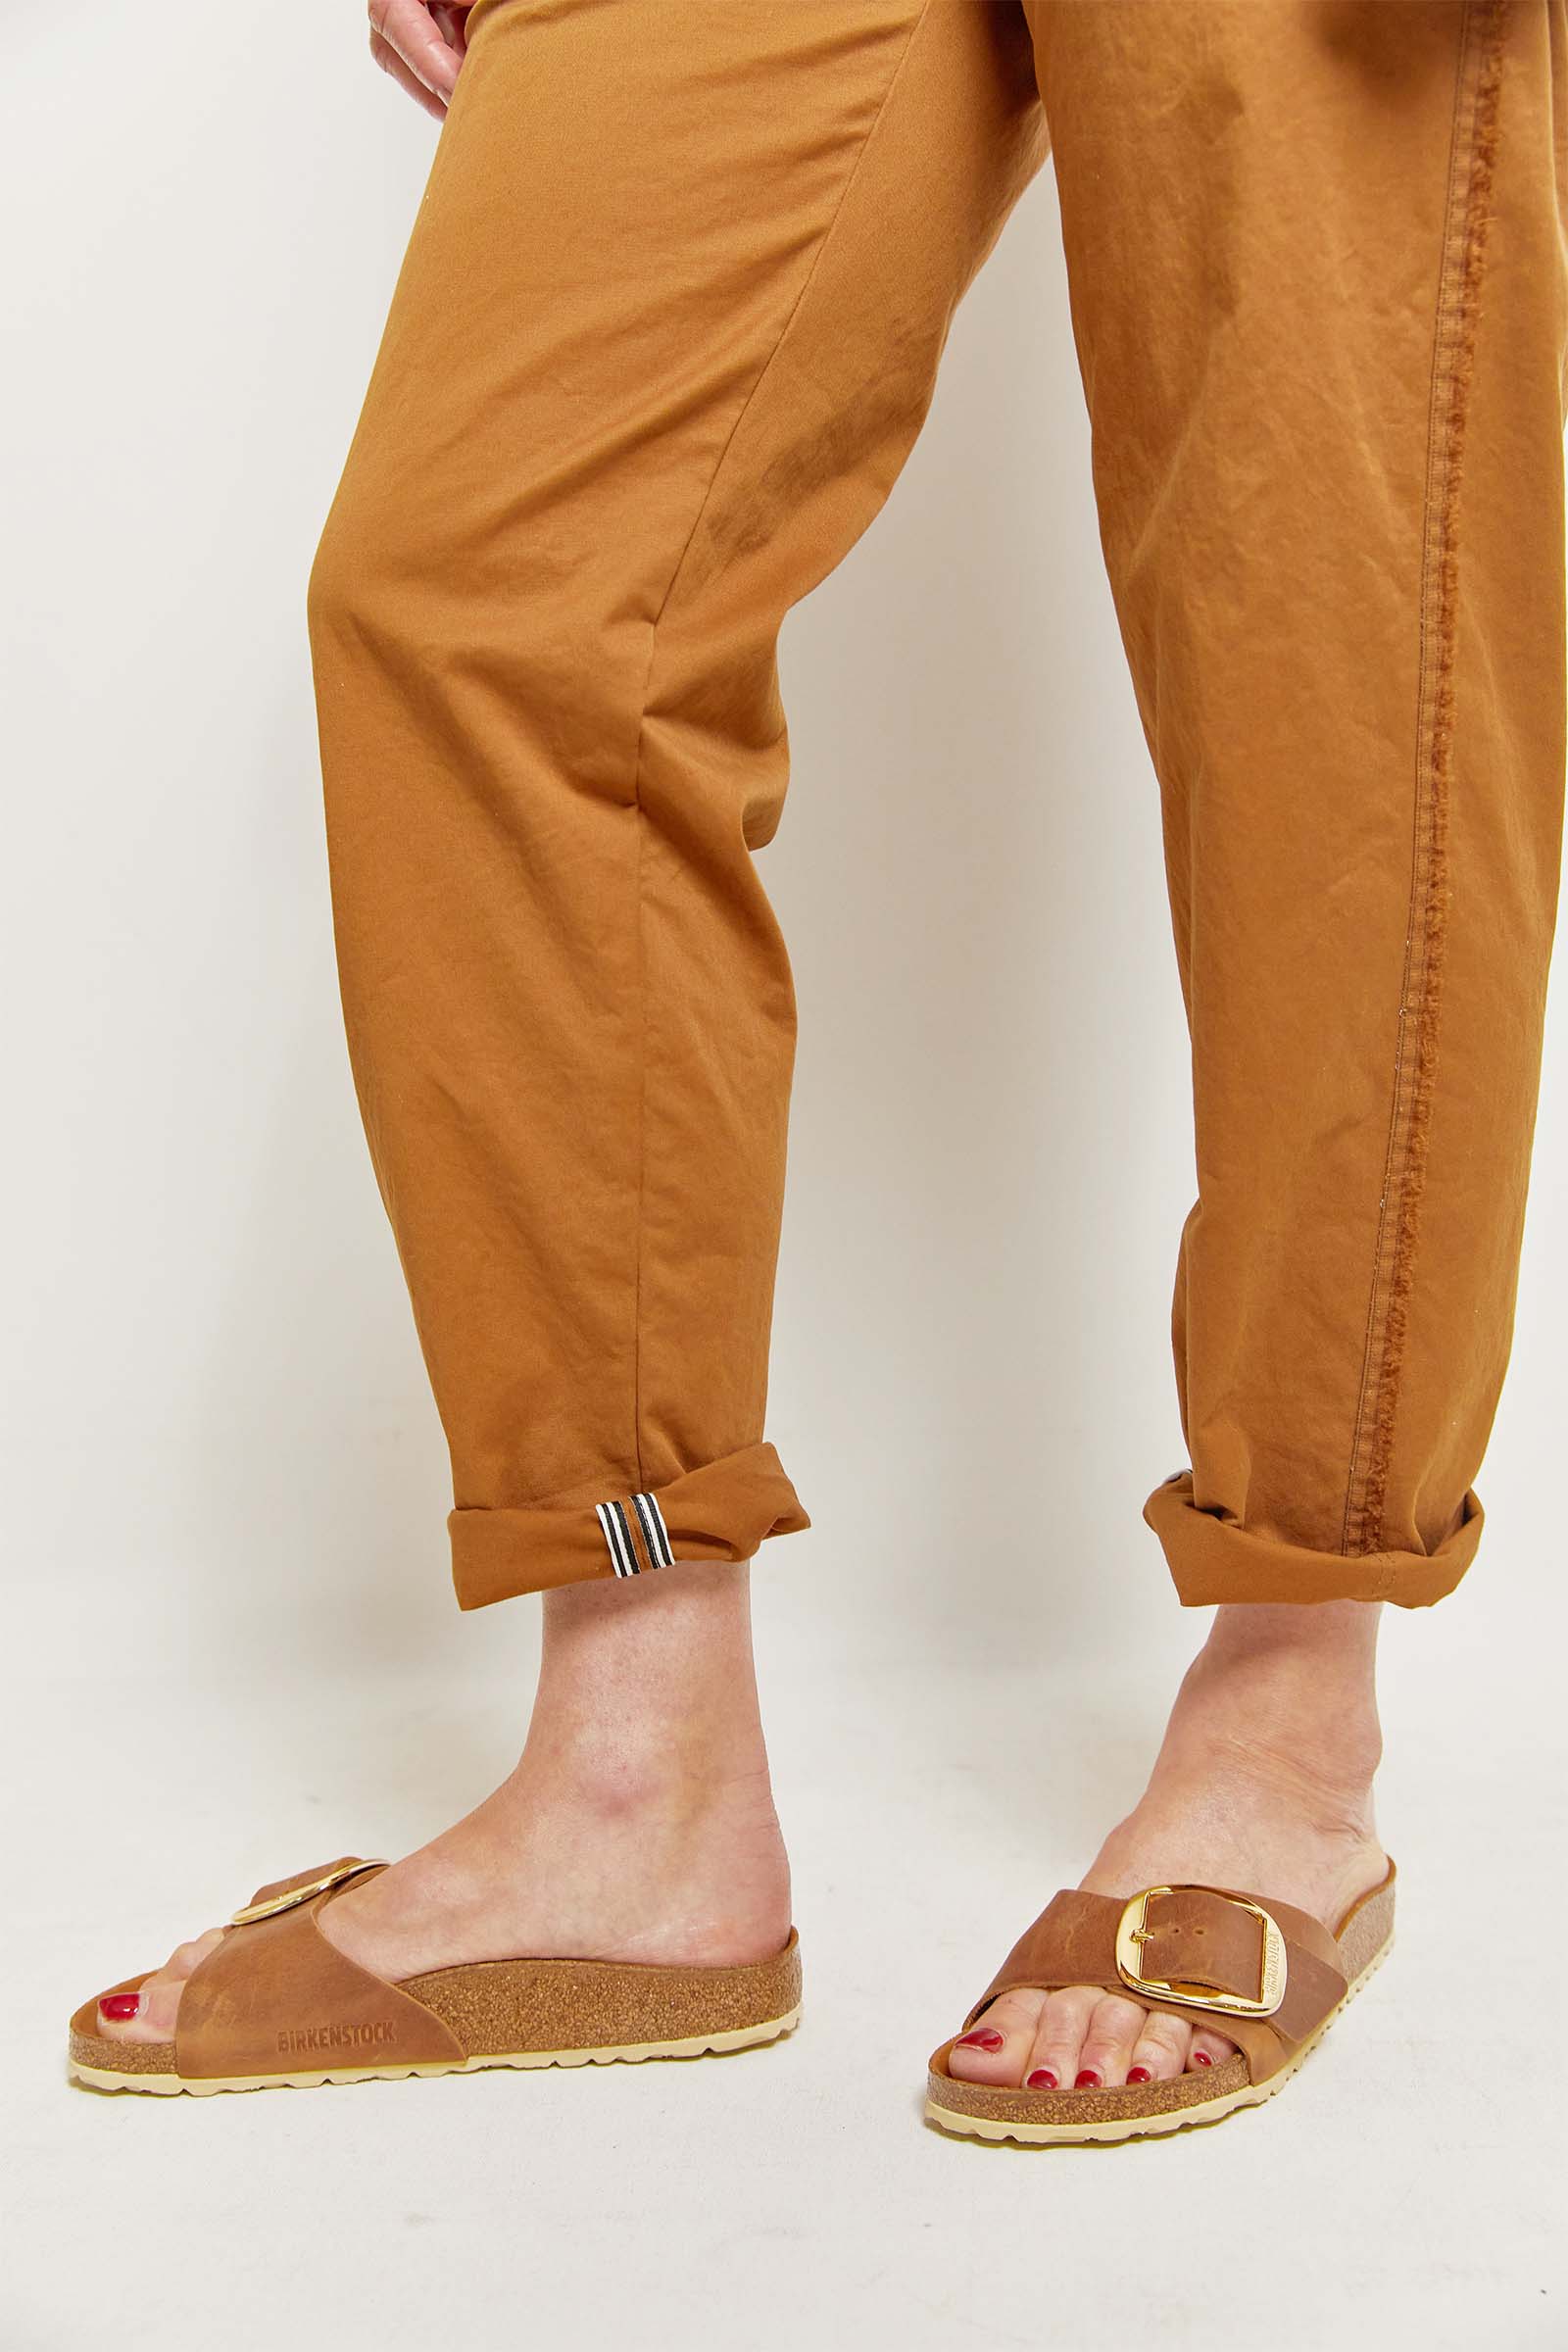 byfreer cotton twill dax cargo pant.